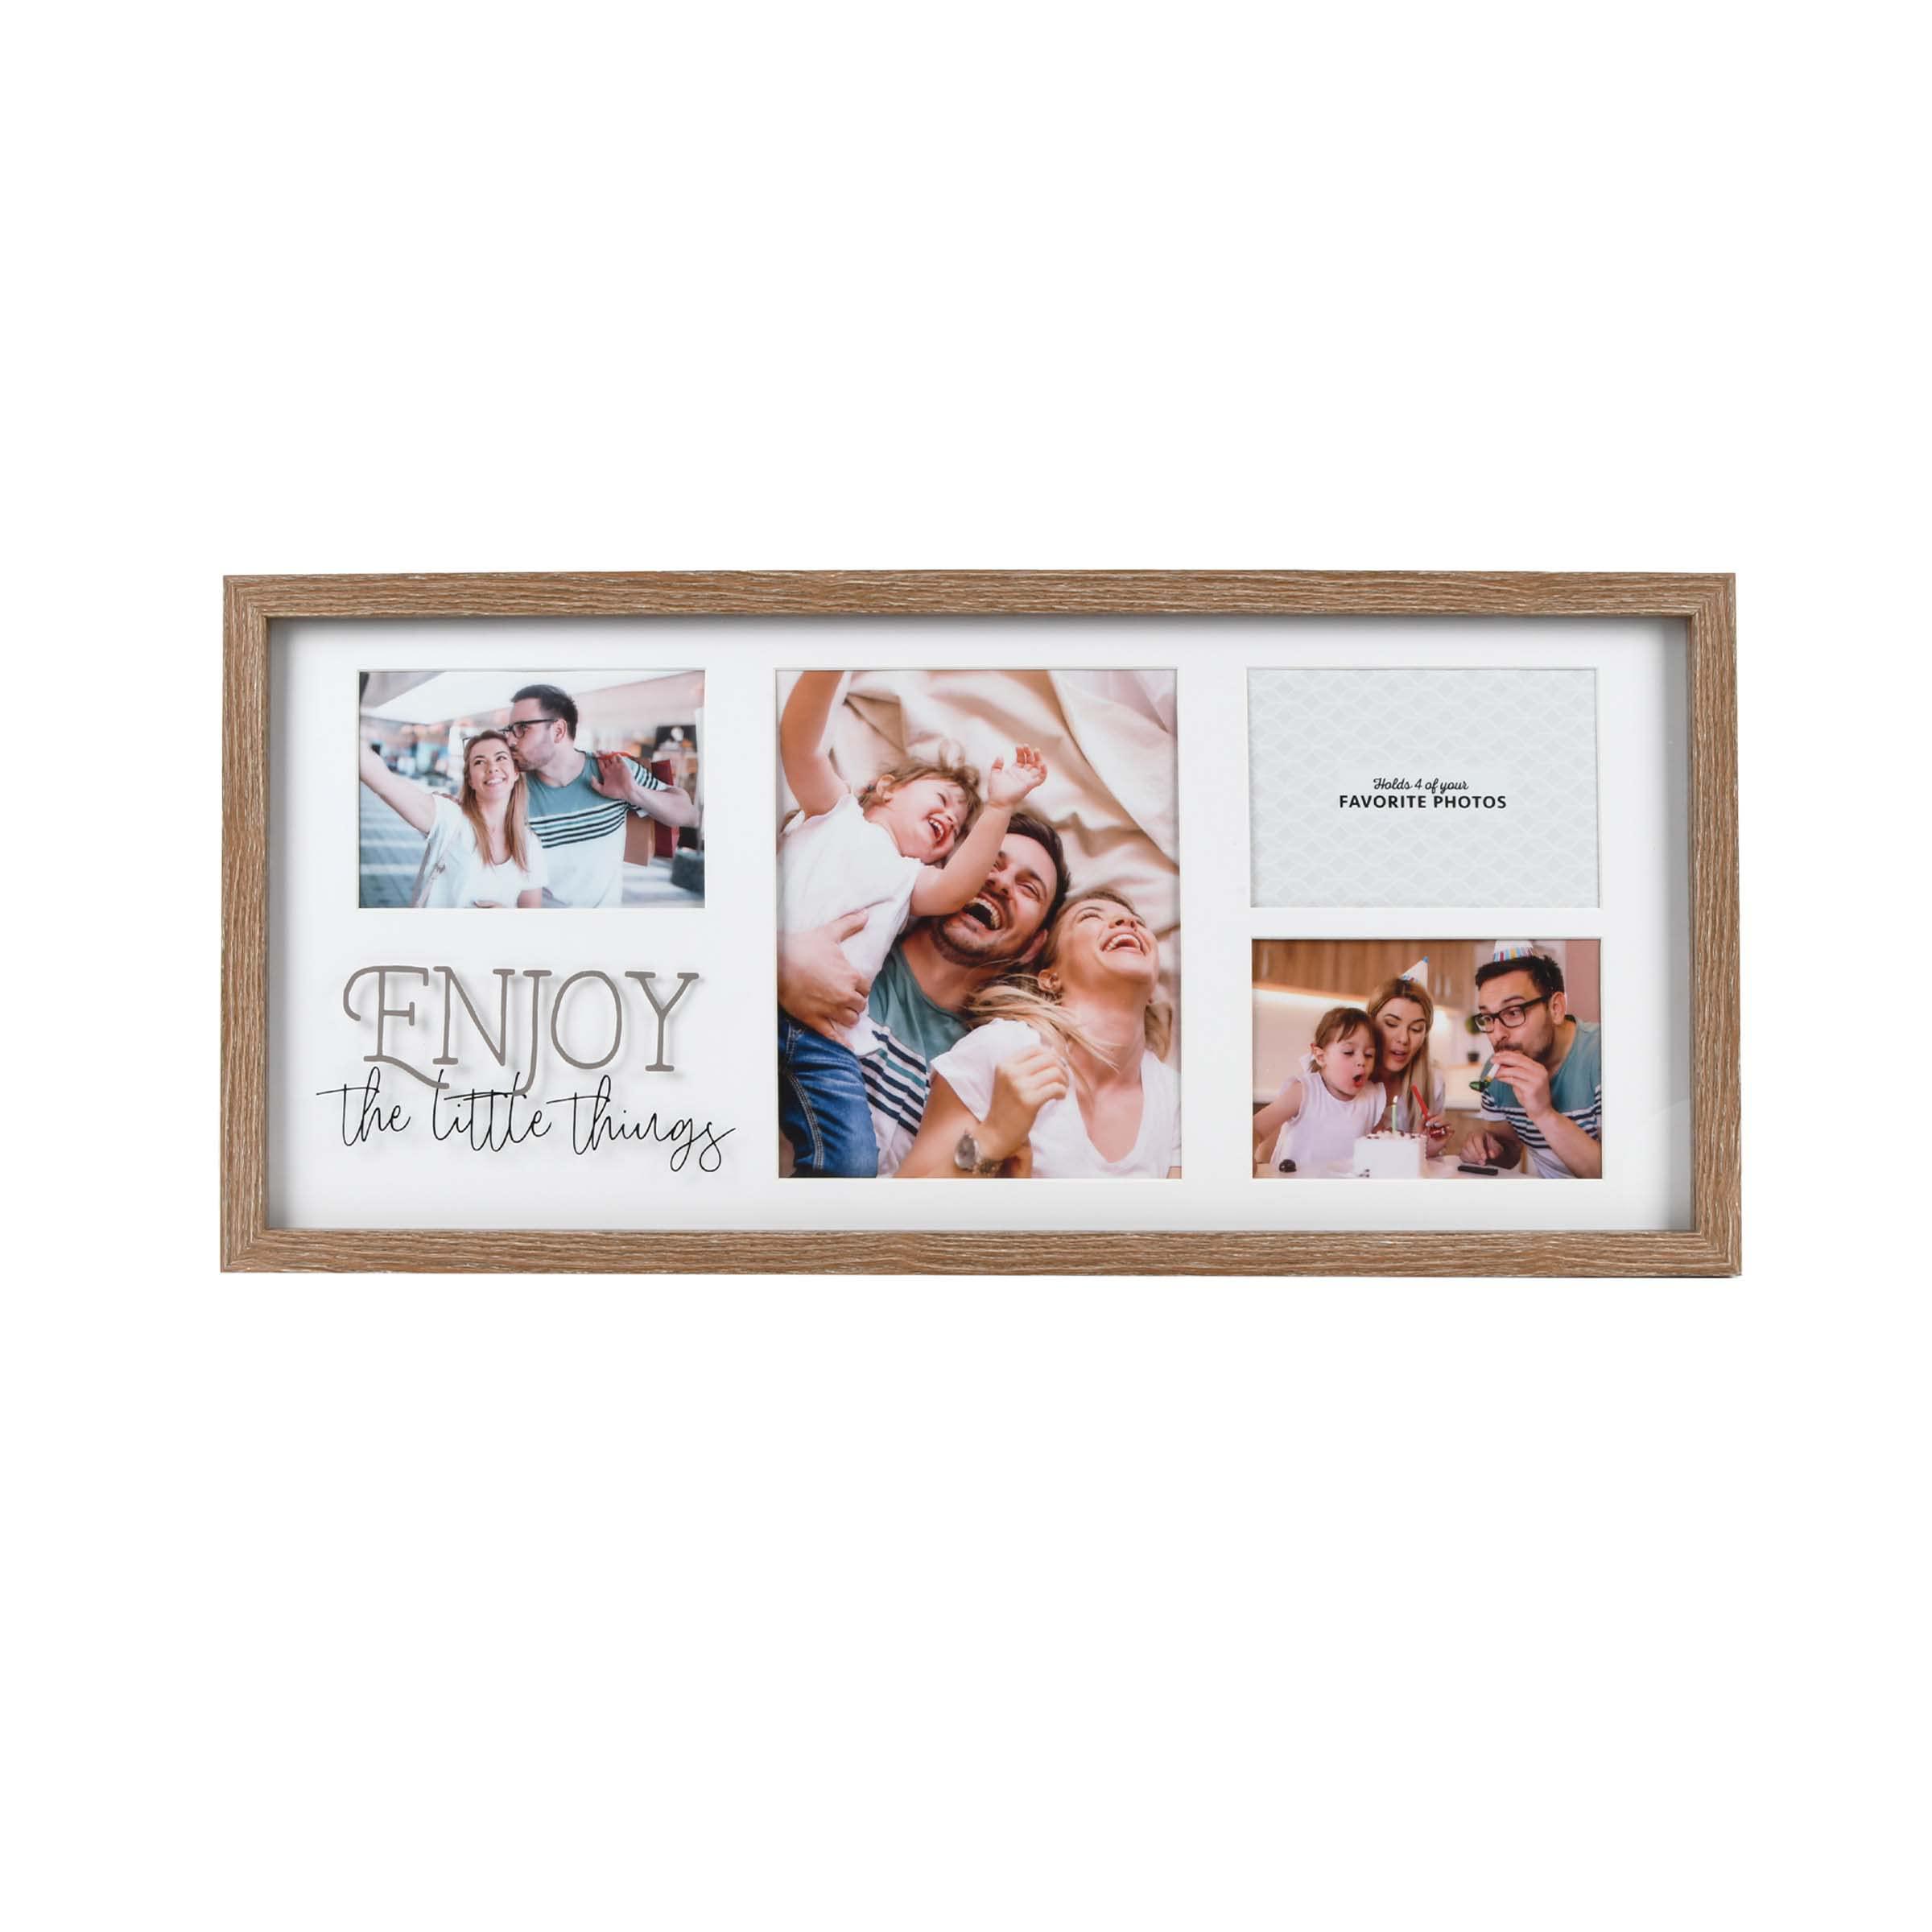 prinz 4-opening enjoy the little things collage picture frame 28" x 13" displays three 5x7 and one 8x10 photos, brown